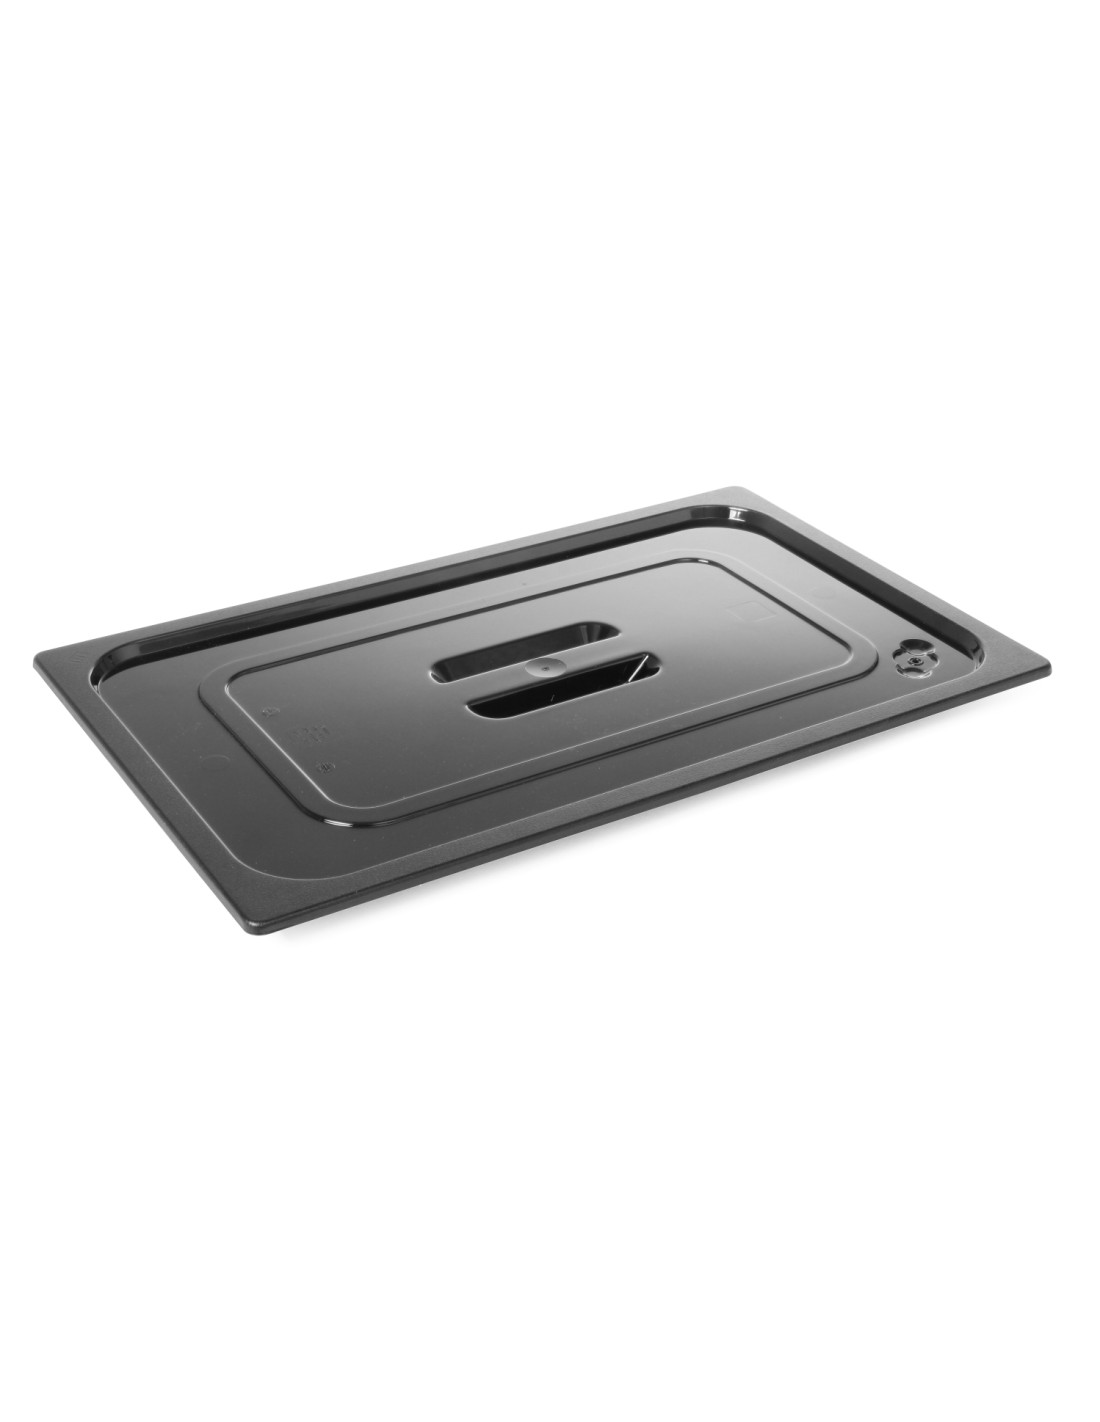 Lid for GN 1/2 trays - In black polycarbonate - mm 325 x 265